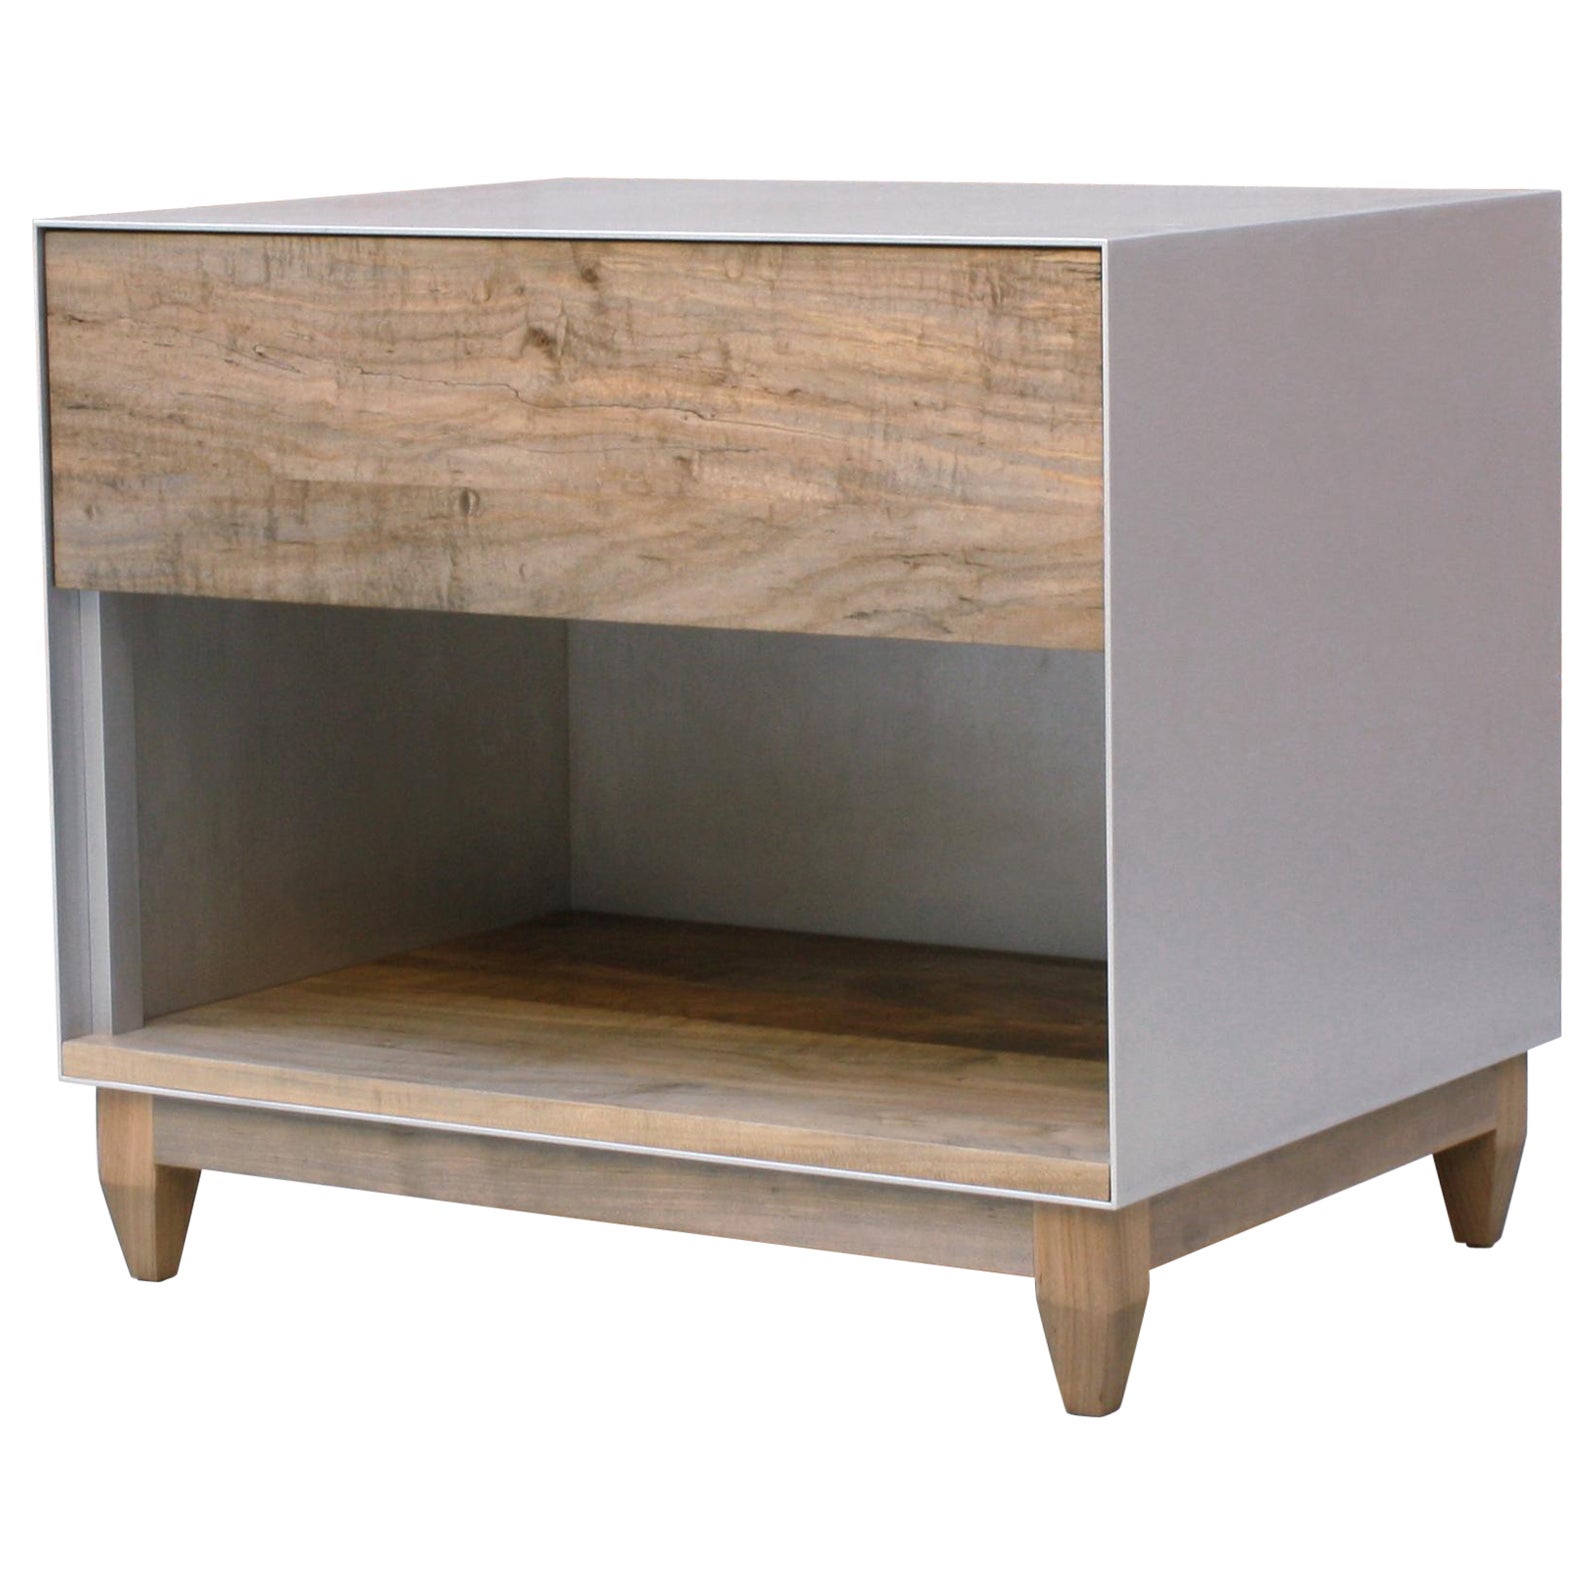 Oxide Metal Side Cabinet in Waxed Aluminum and Oxidized Maple by Laylo Studio